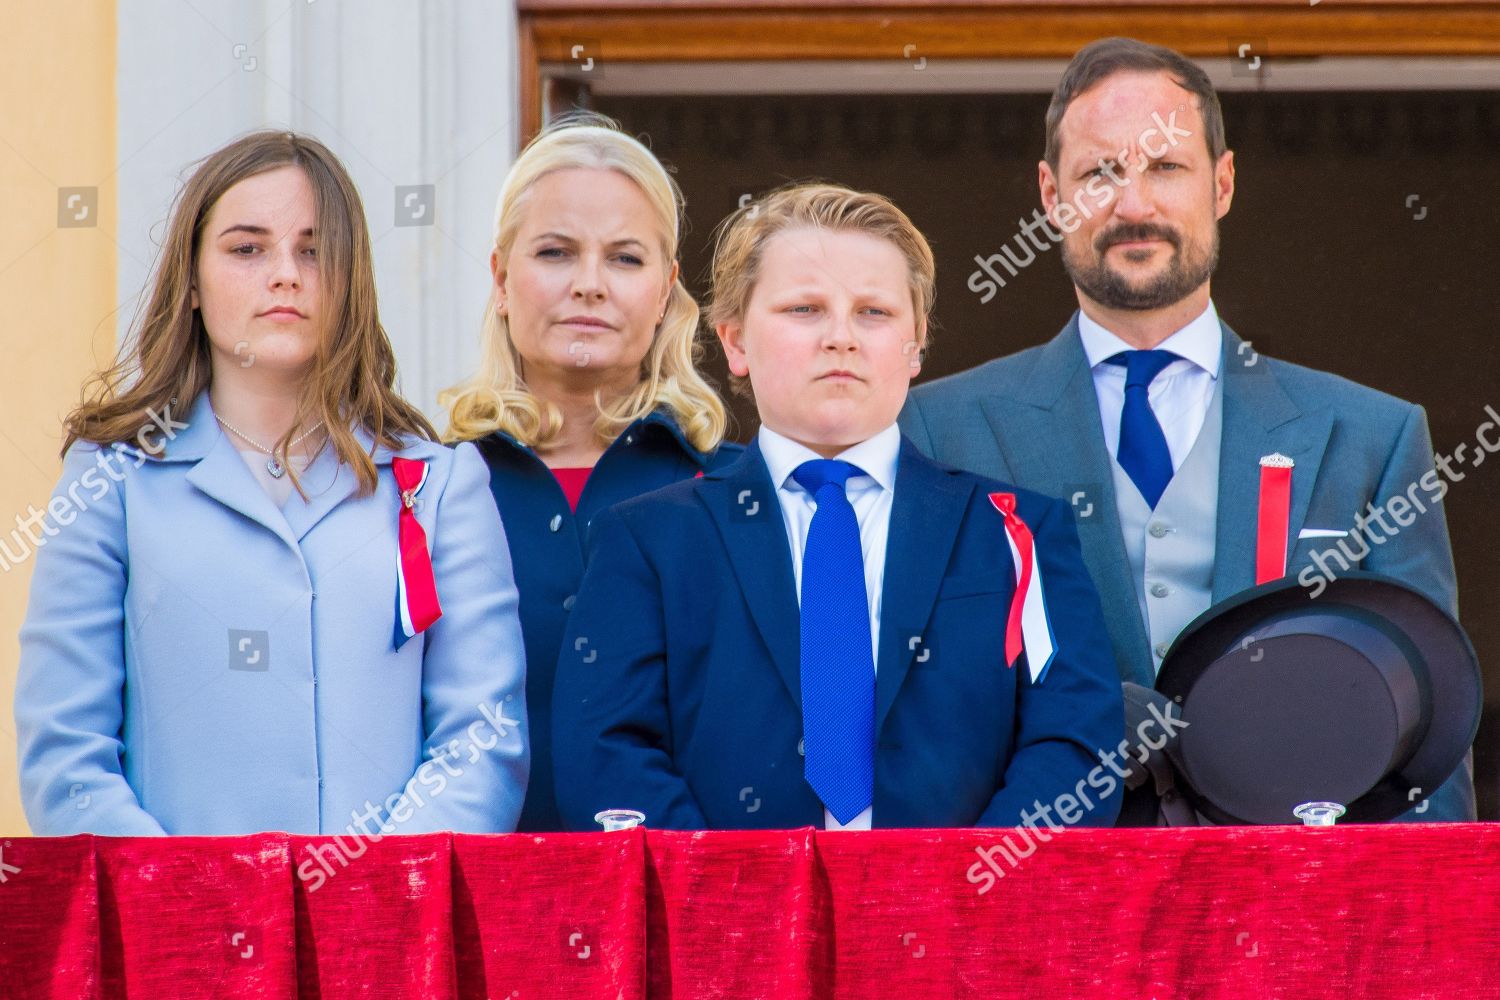 national-day-celebrations-the-royal-palace-oslo-norway-shutterstock-editorial-10239768ae.jpg